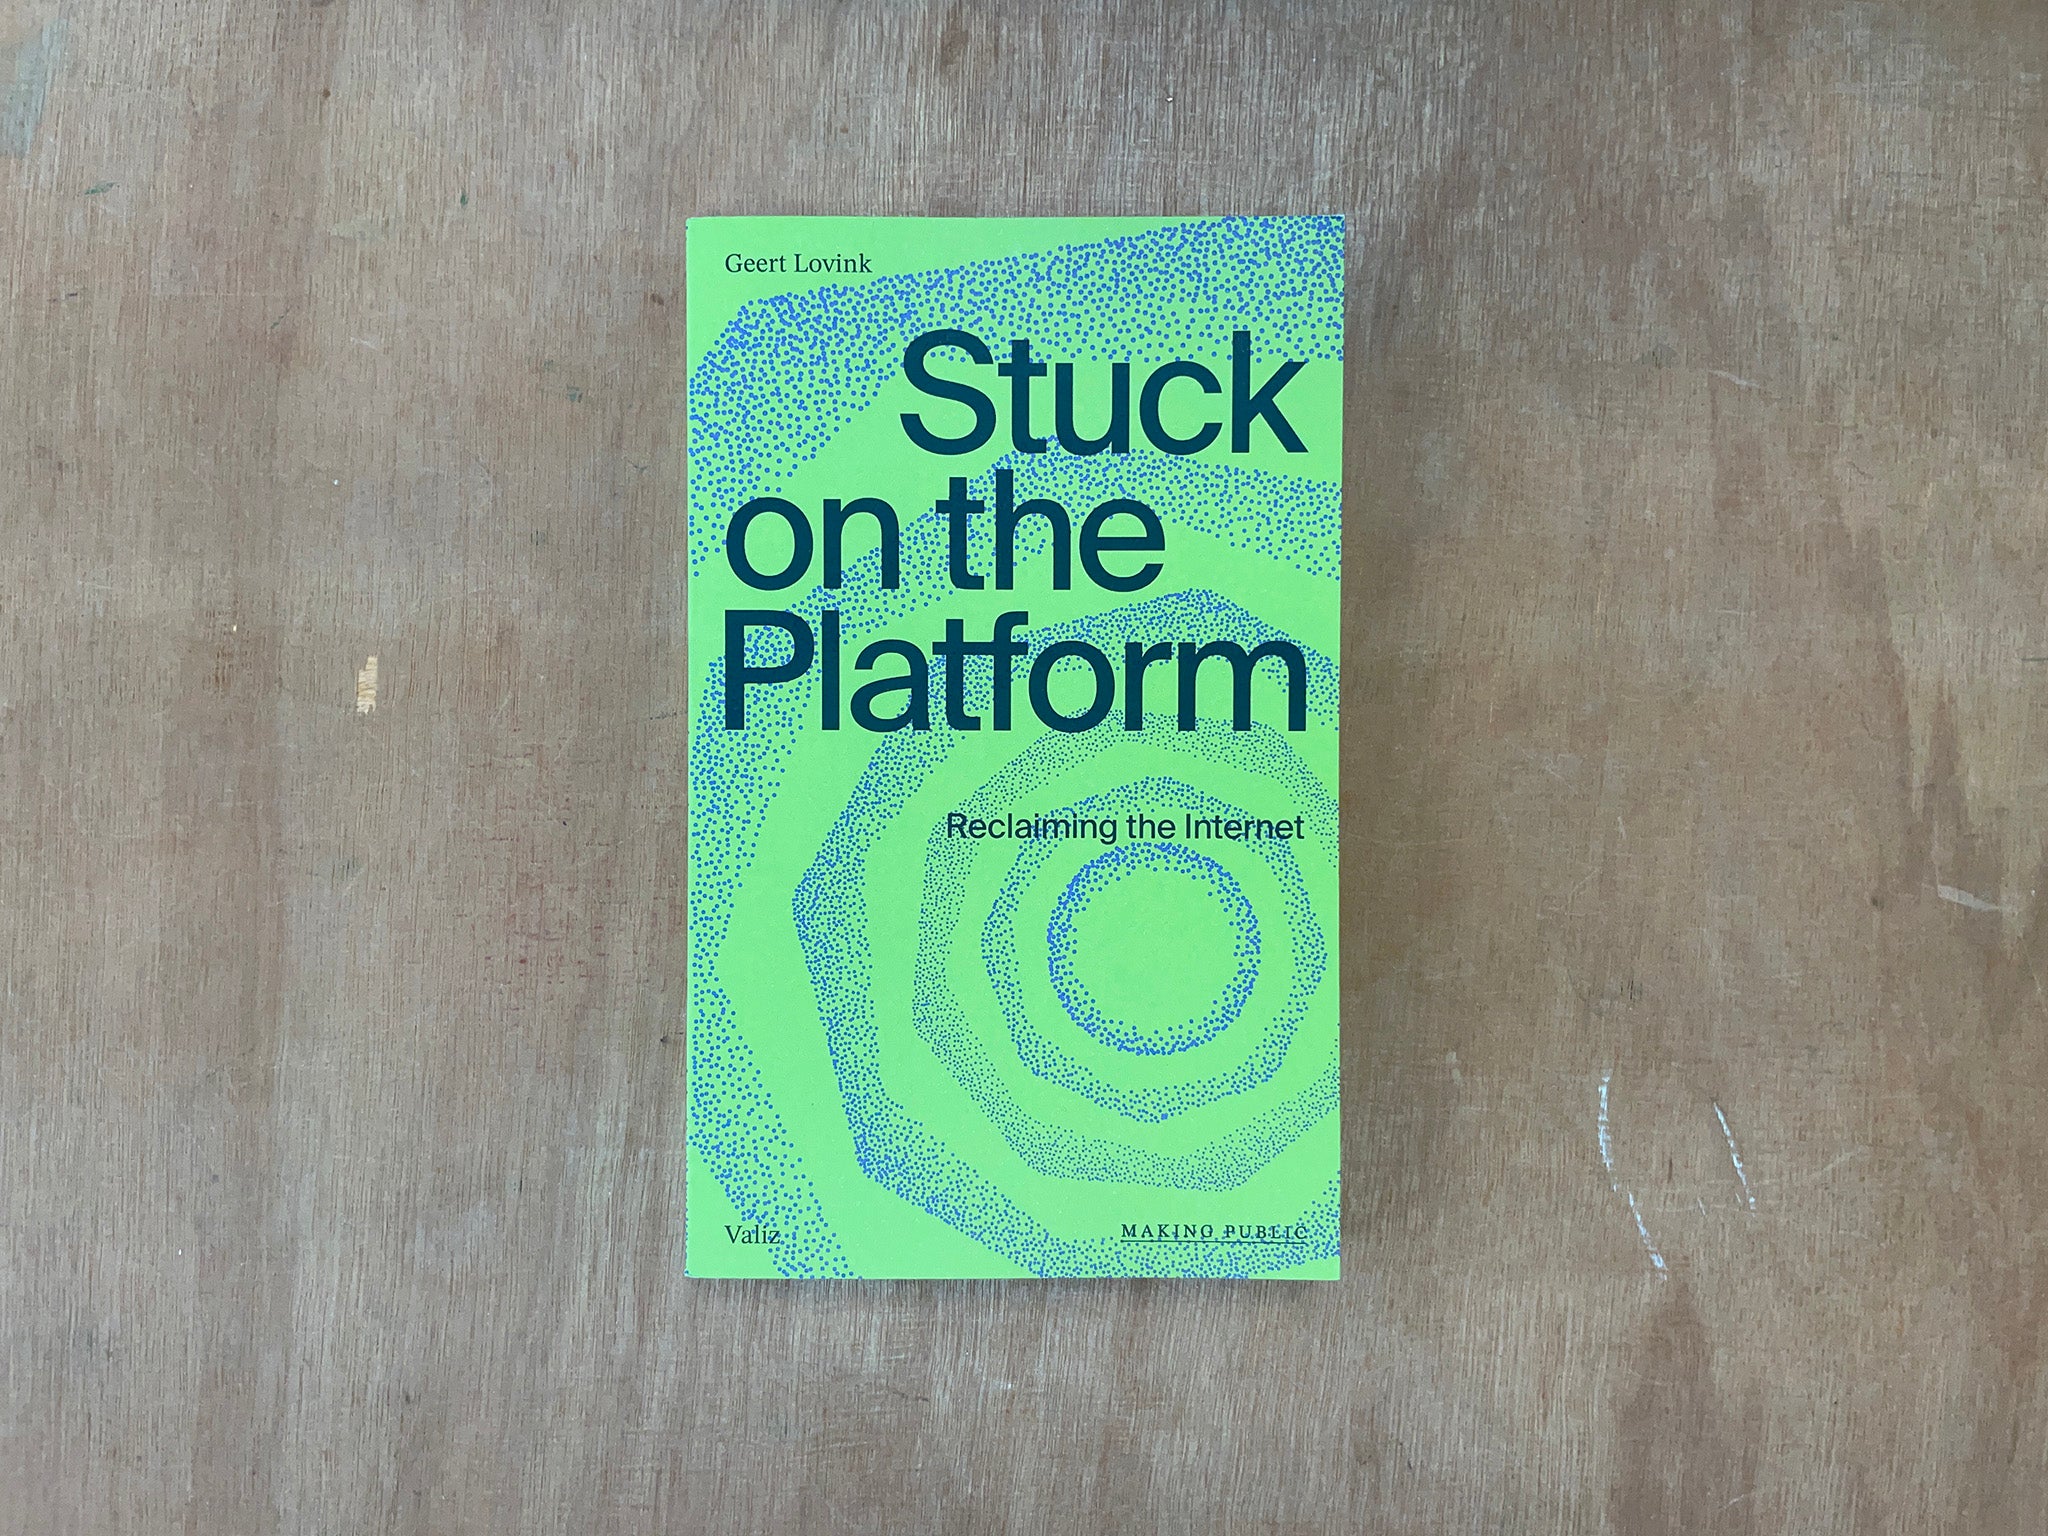 STUCK ON THE PLATFORM: RECLAIMING THE INTERNET by Geert Lovink